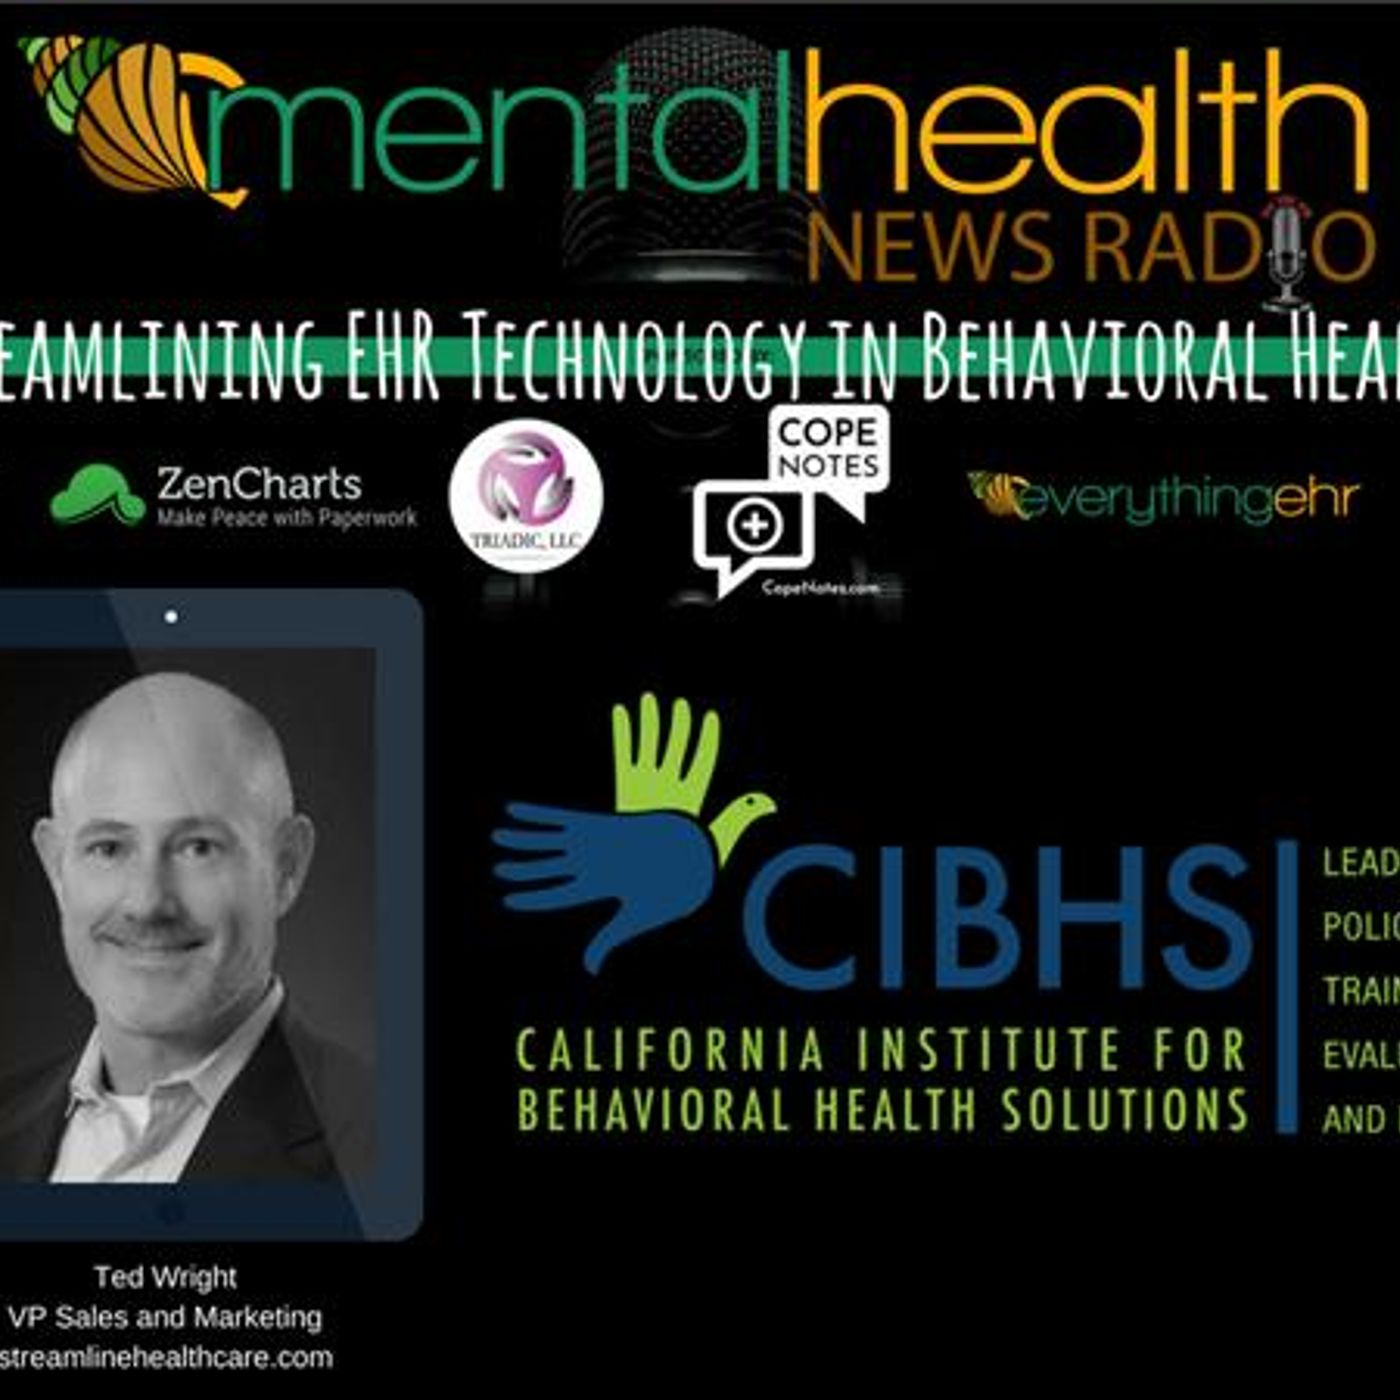 Mental Health News Radio - Streamlining EHR Technology in Behavioral Health with Ted Wright